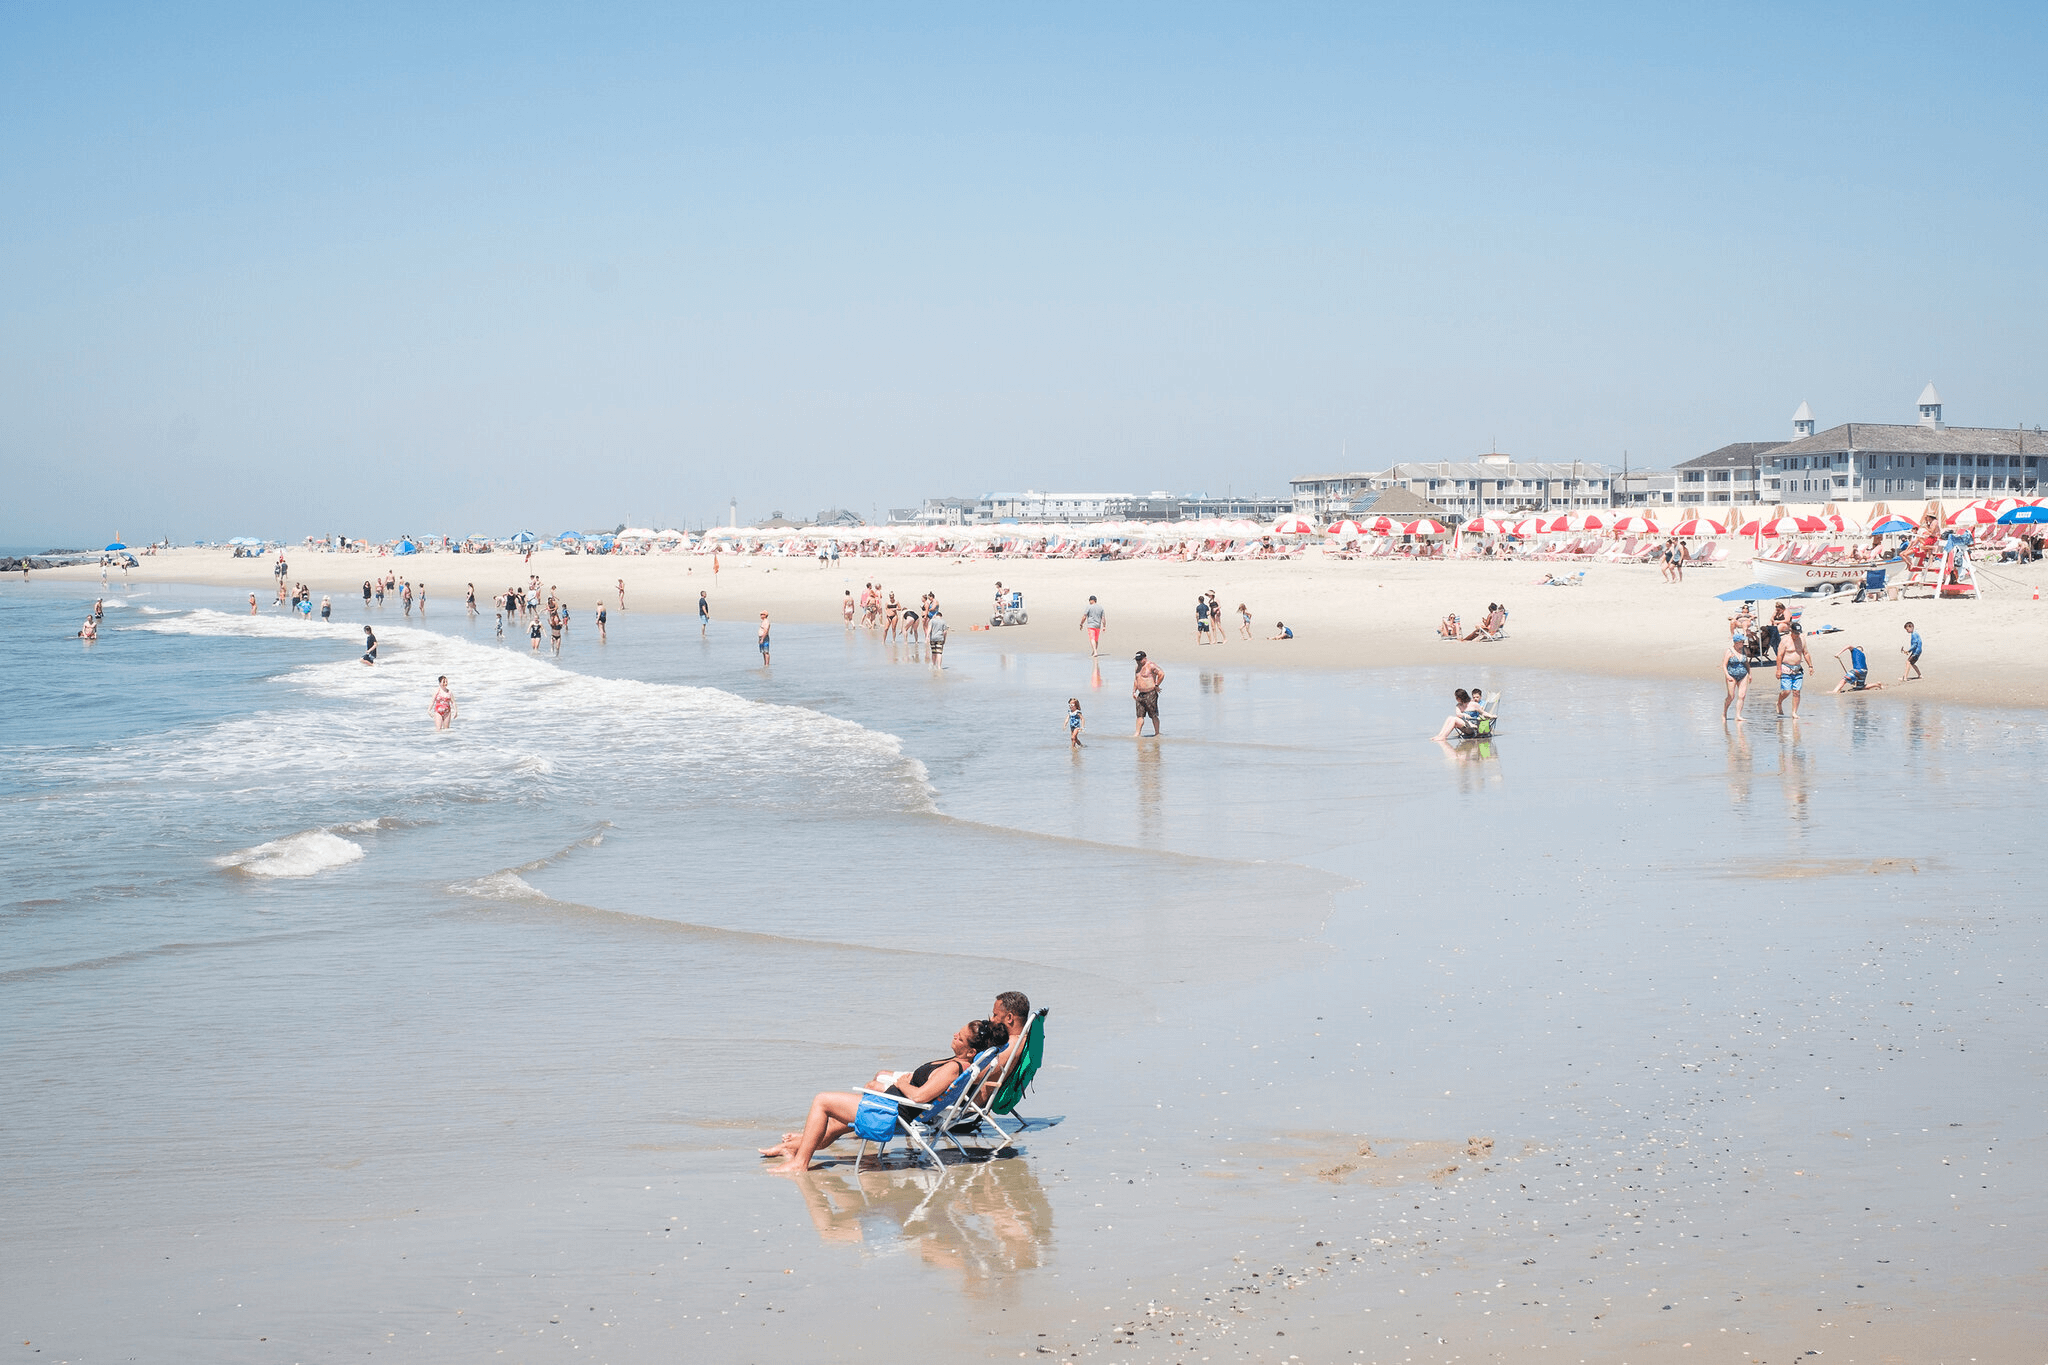 Fun Things To Do In Cape May, New Jersey